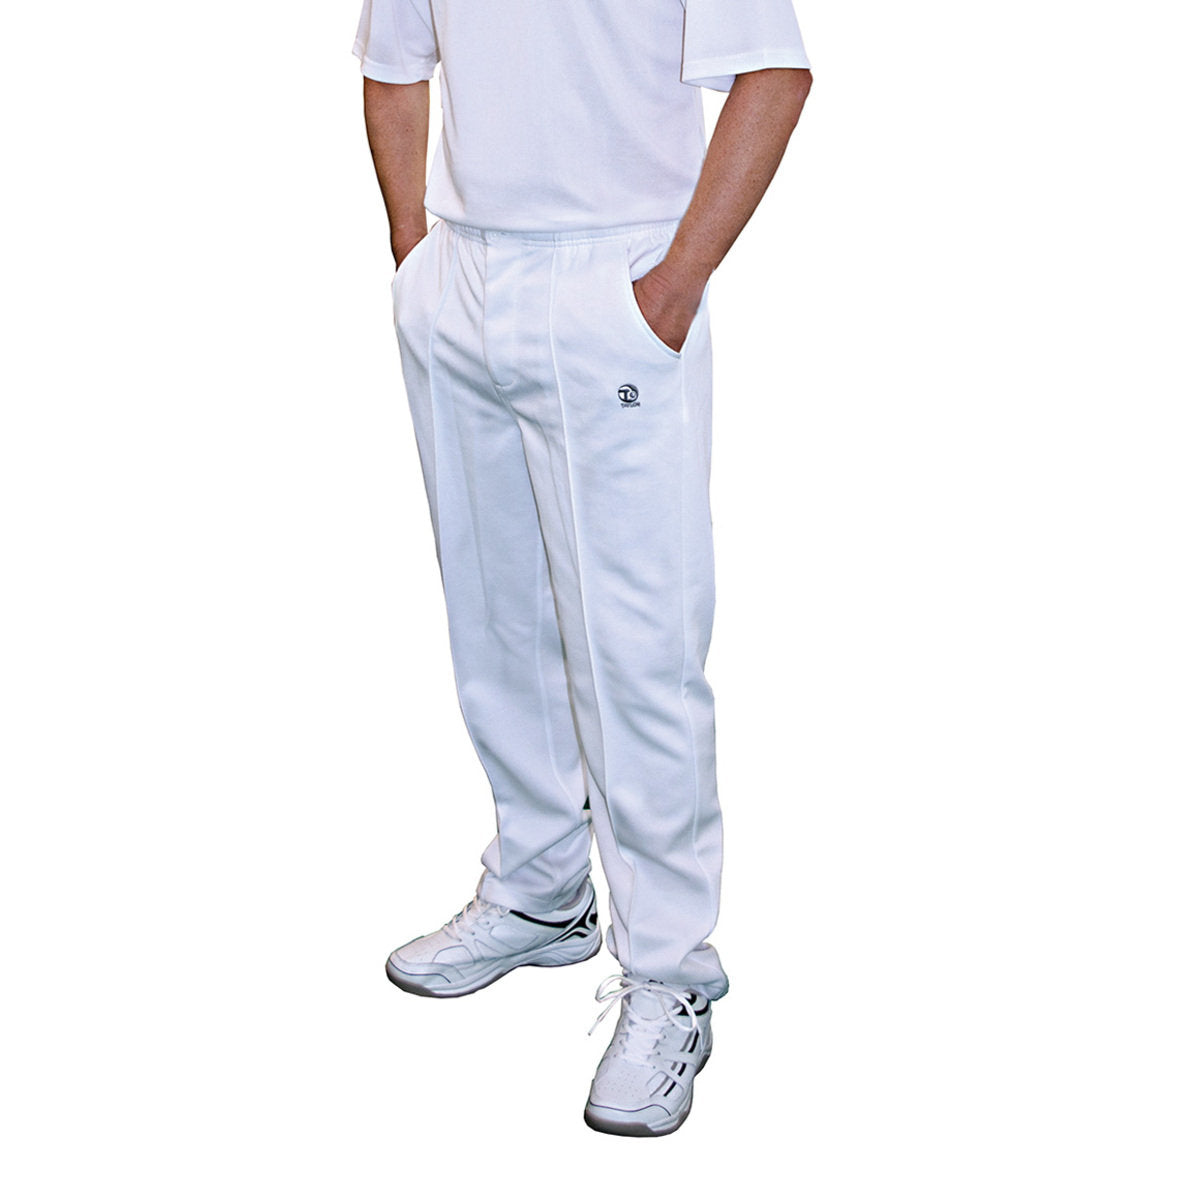 Taylor Gents White Sports Trousers